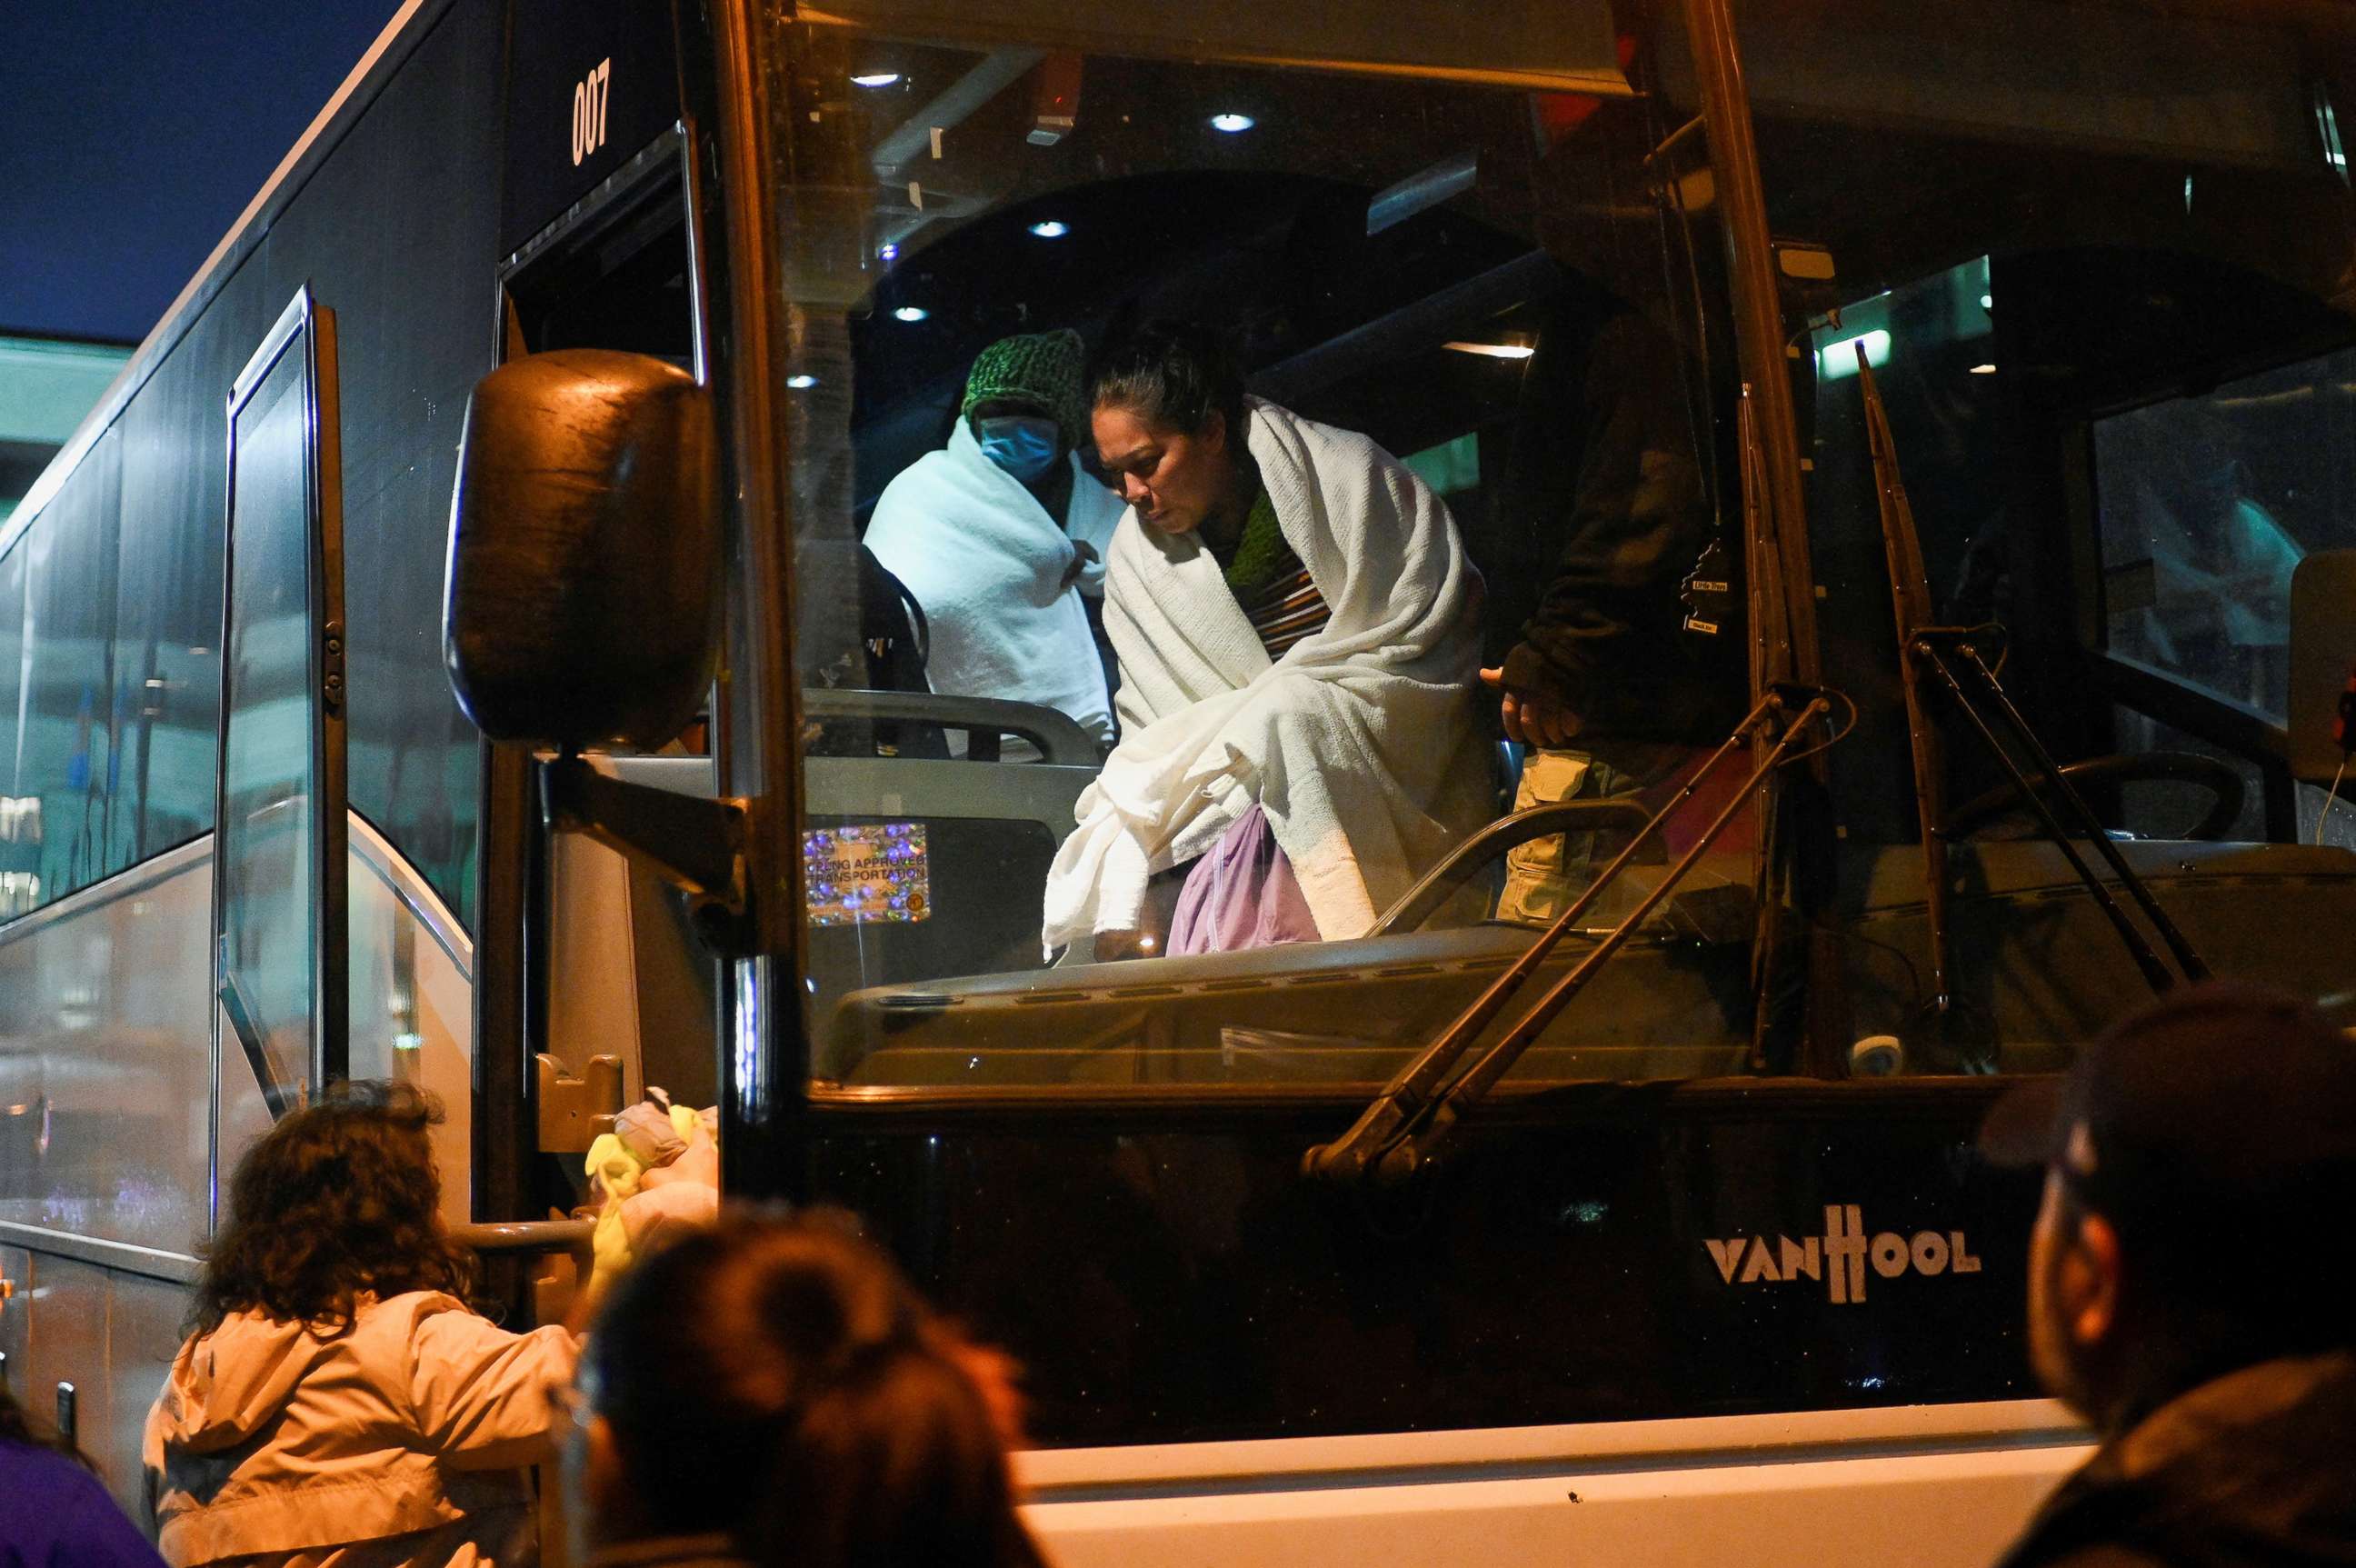 PHOTO: Migrants transported from the U.S. border arrive on a bus from Texas and are taken by city officials to wait for relocation, in Philadelphia, Nov. 16, 2022.